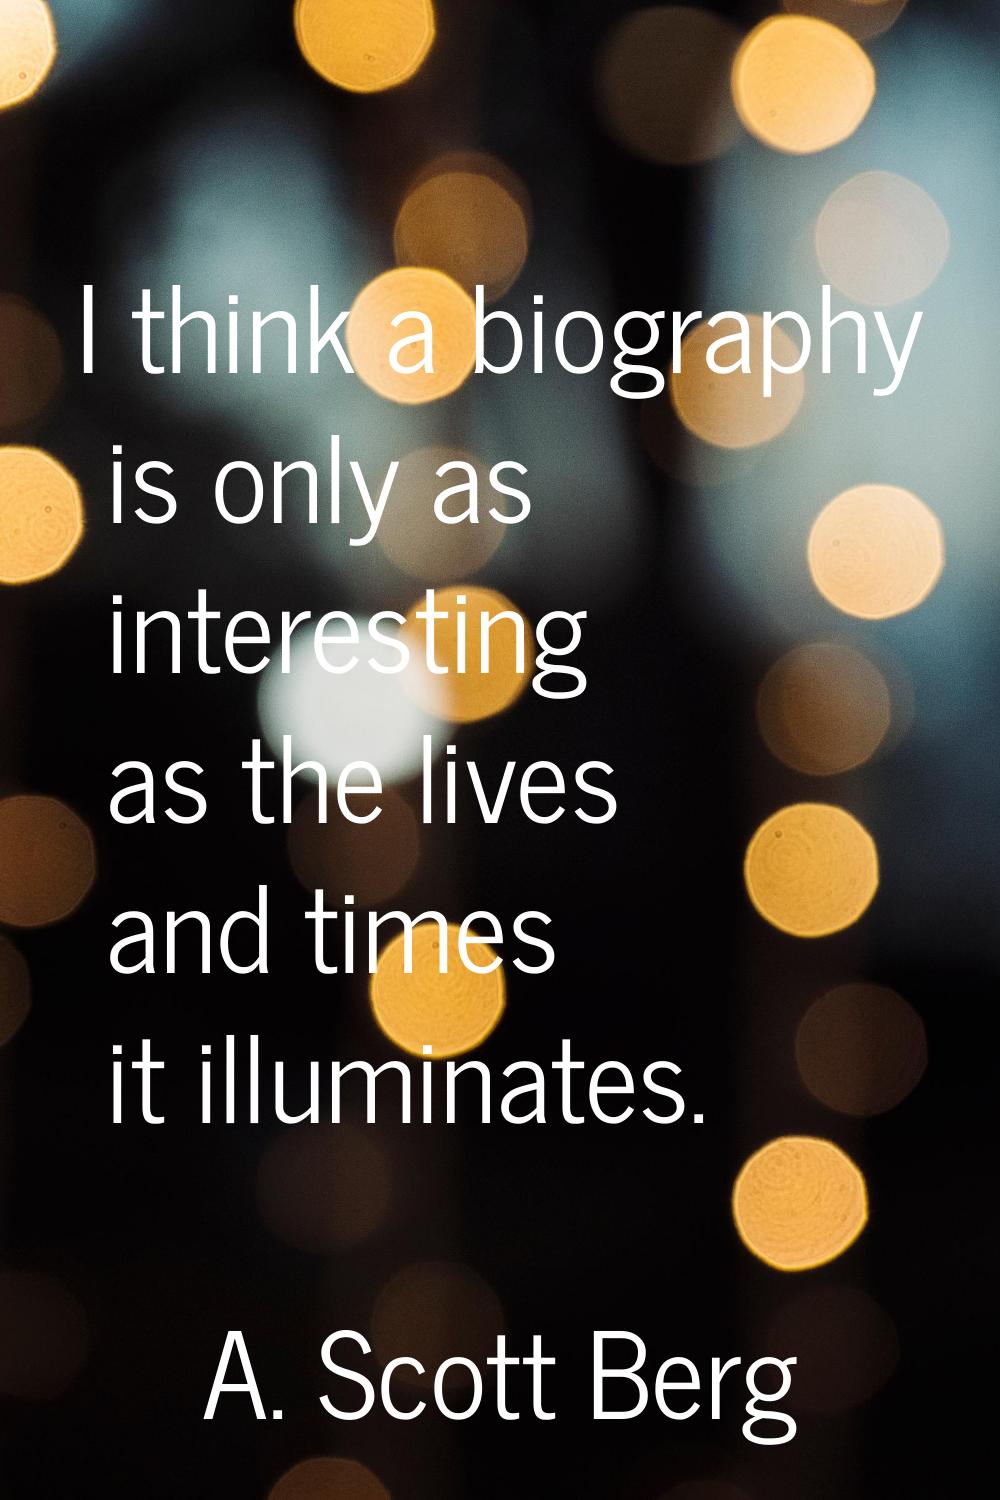 I think a biography is only as interesting as the lives and times it illuminates.